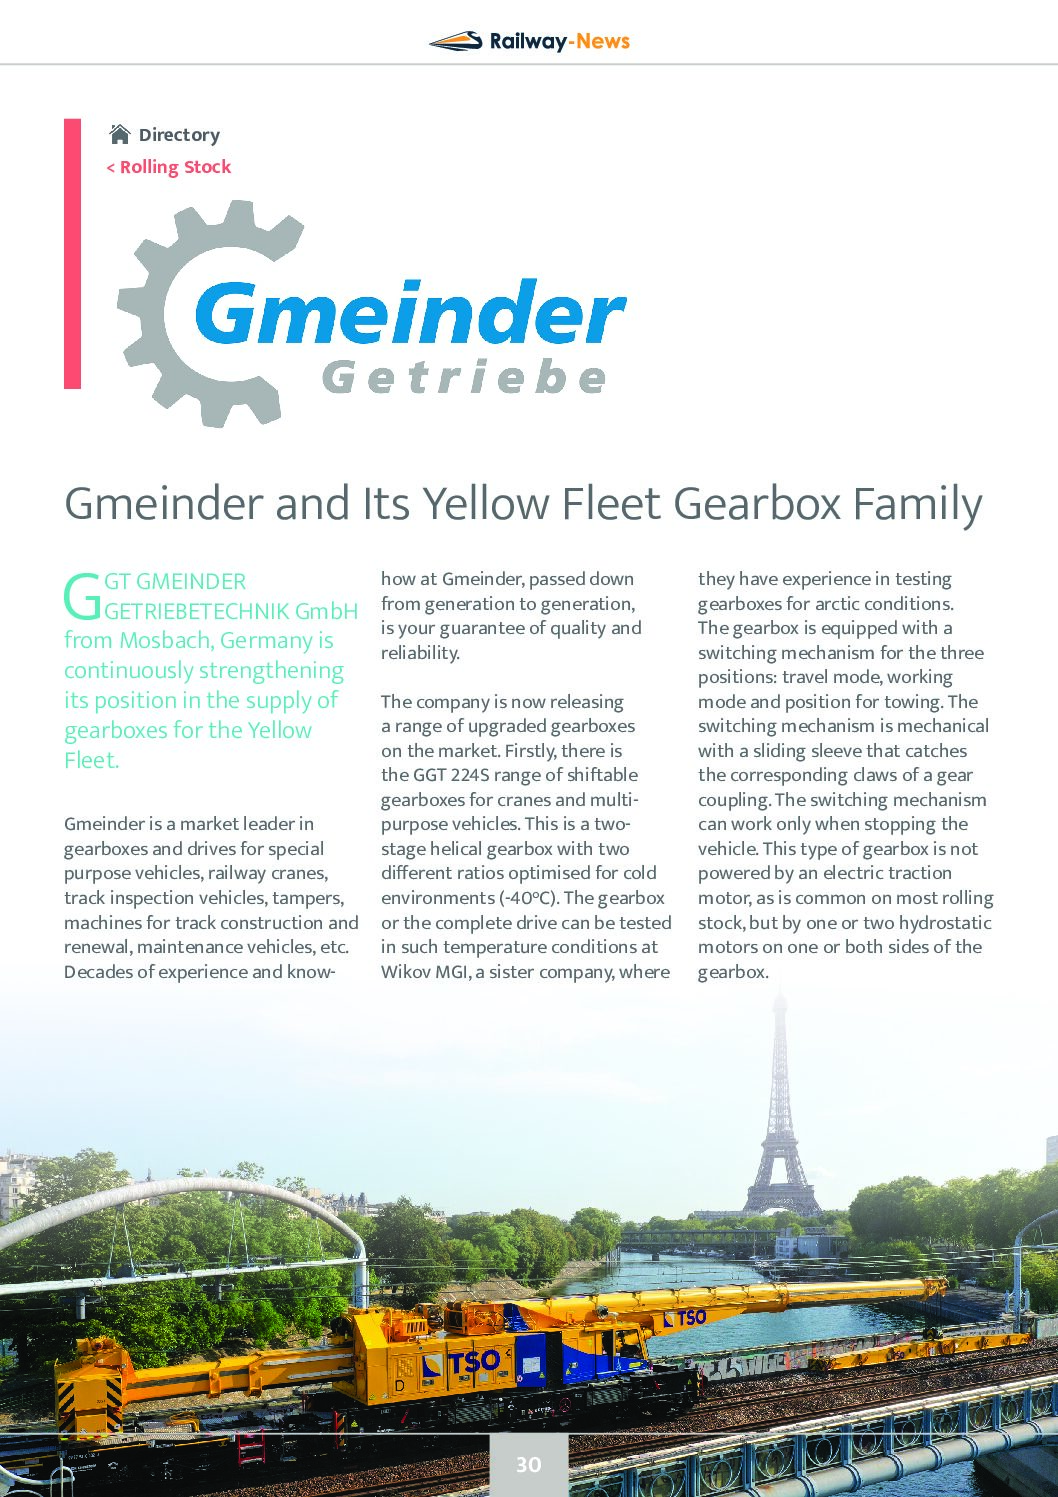 Gmeinder and Its Yellow Fleet Gearbox Family